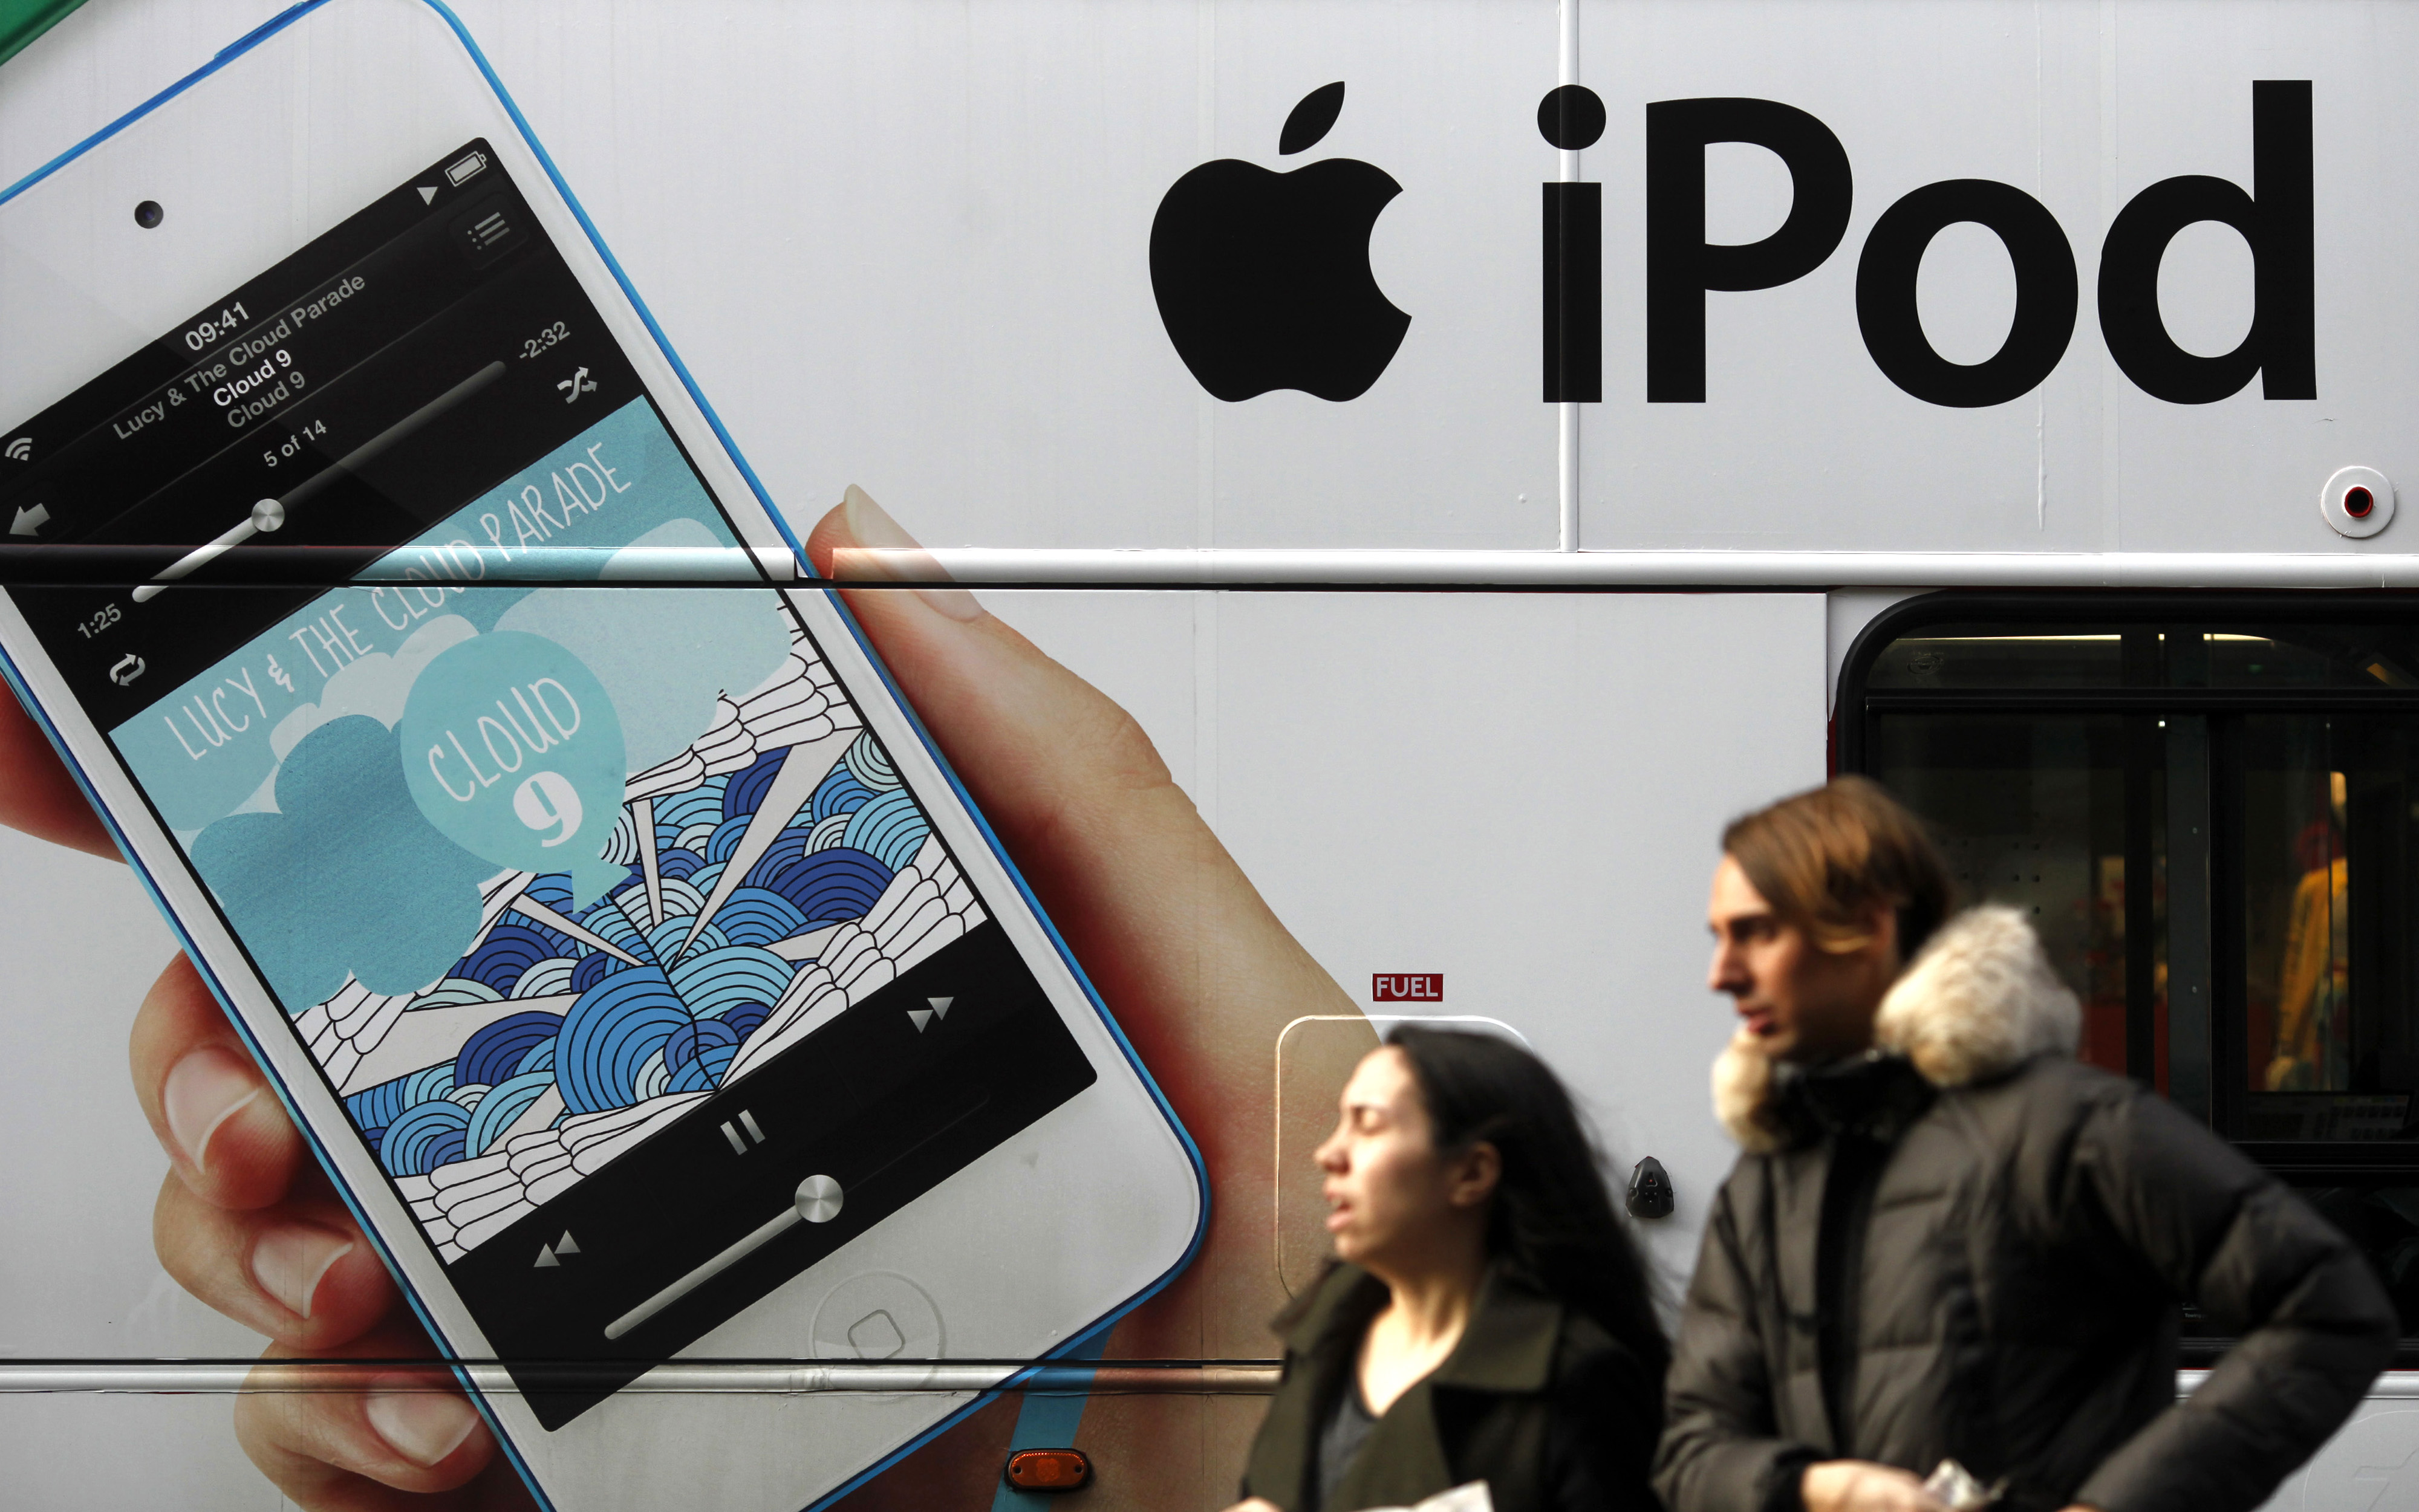 An advertisement for Apple's iPod is displayed on the side of a London bus, Dec. 21, 2012. (Simon Dawson—Bloomberg/Getty Images)